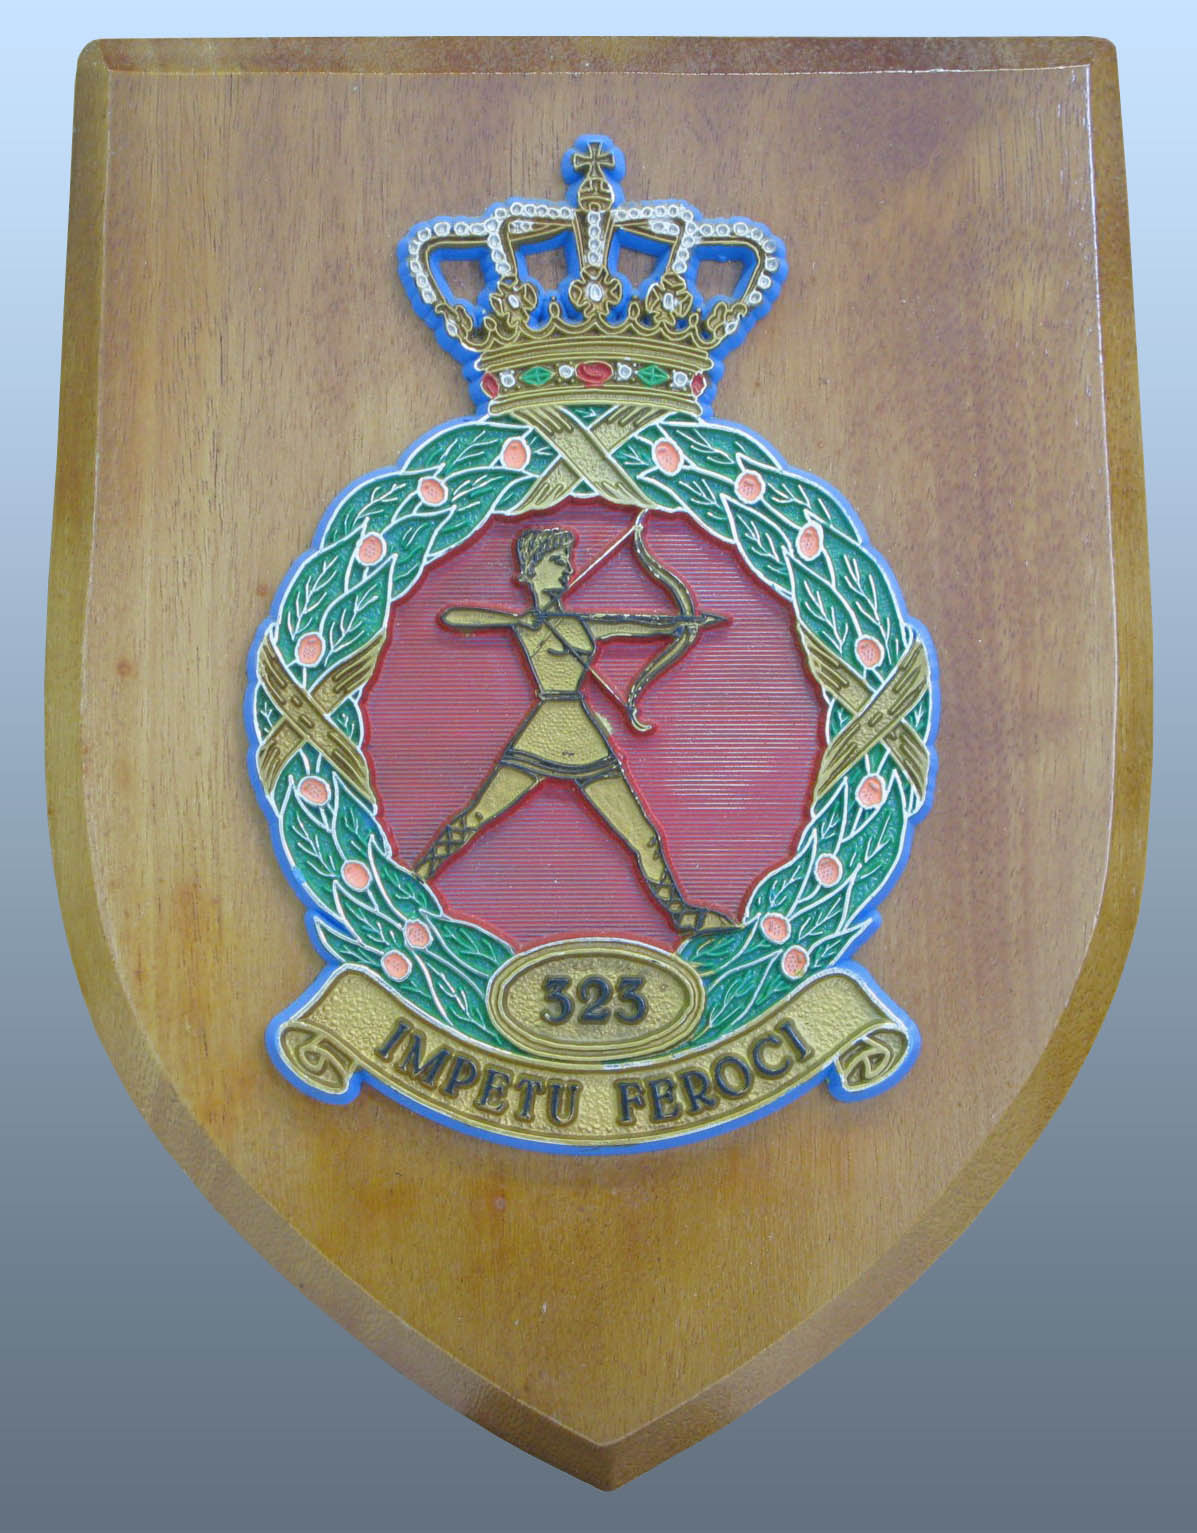 Plaque from RNLAF 323 Squadron